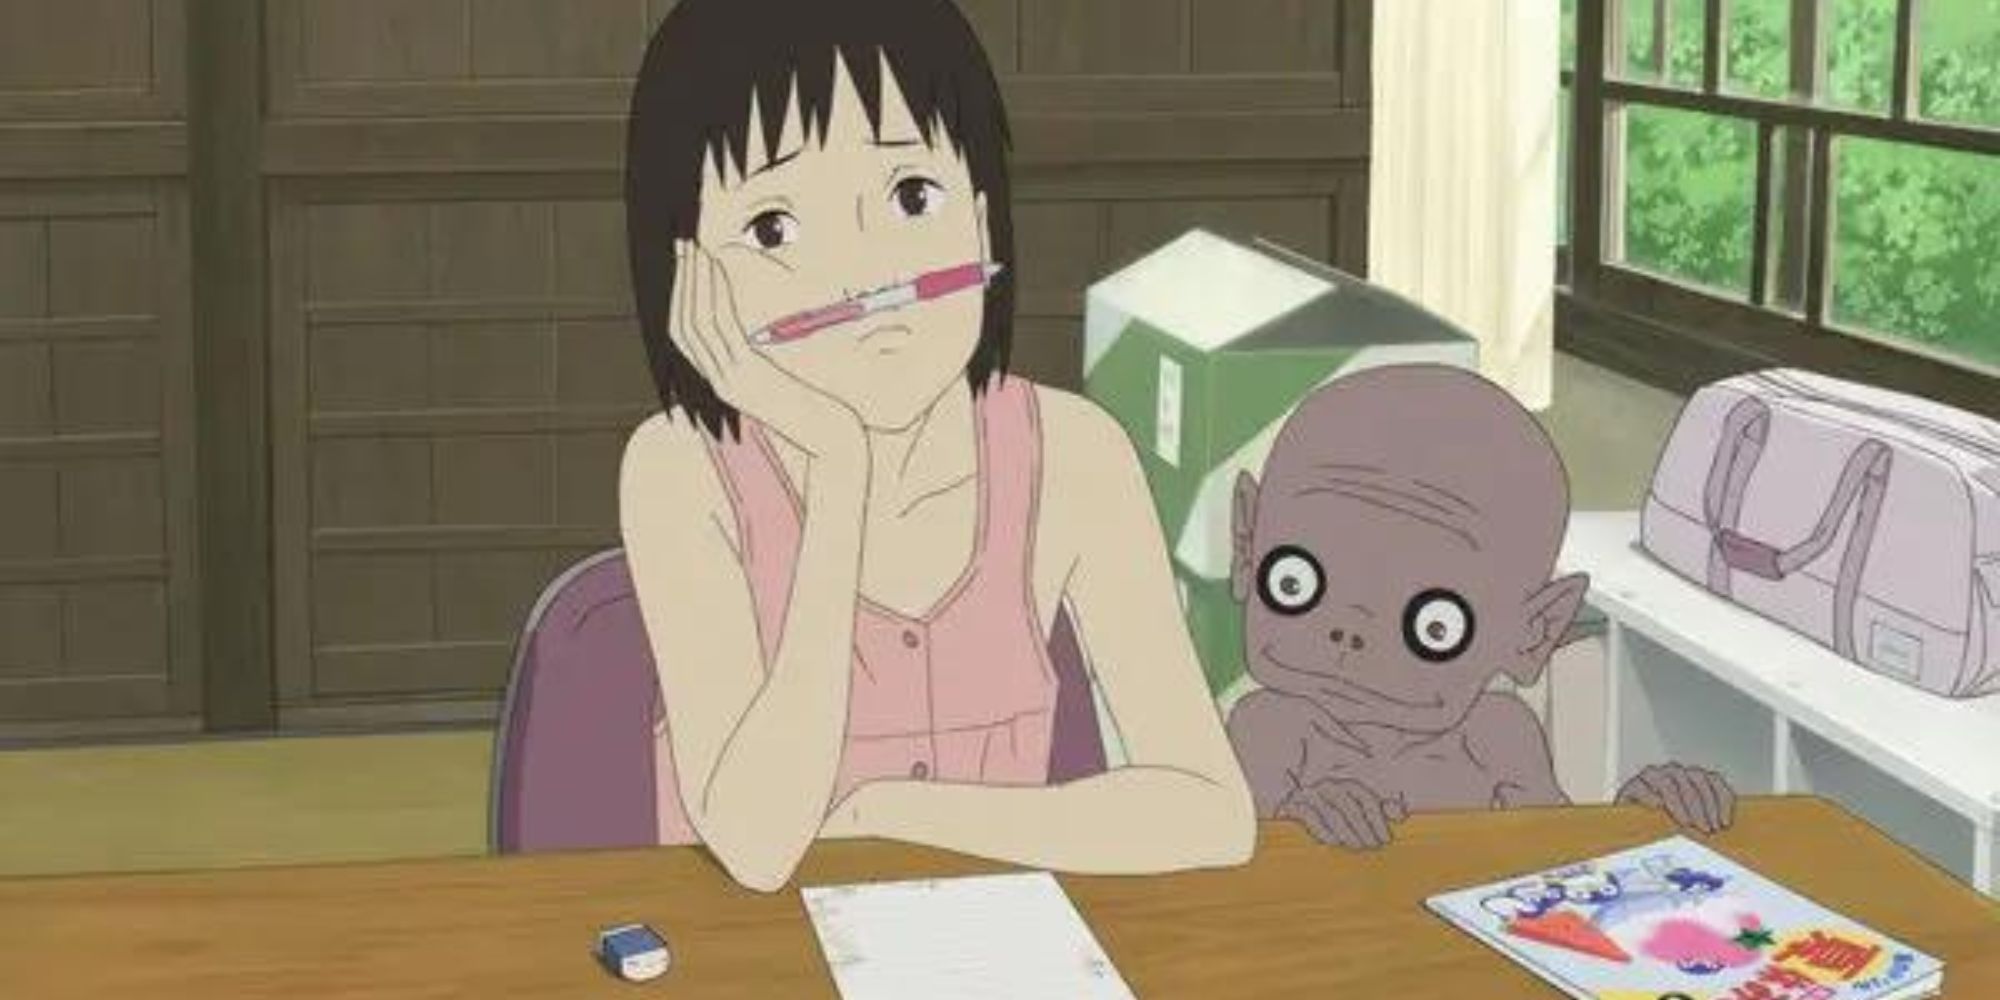 A Letter To Momo protagonist sits at desk